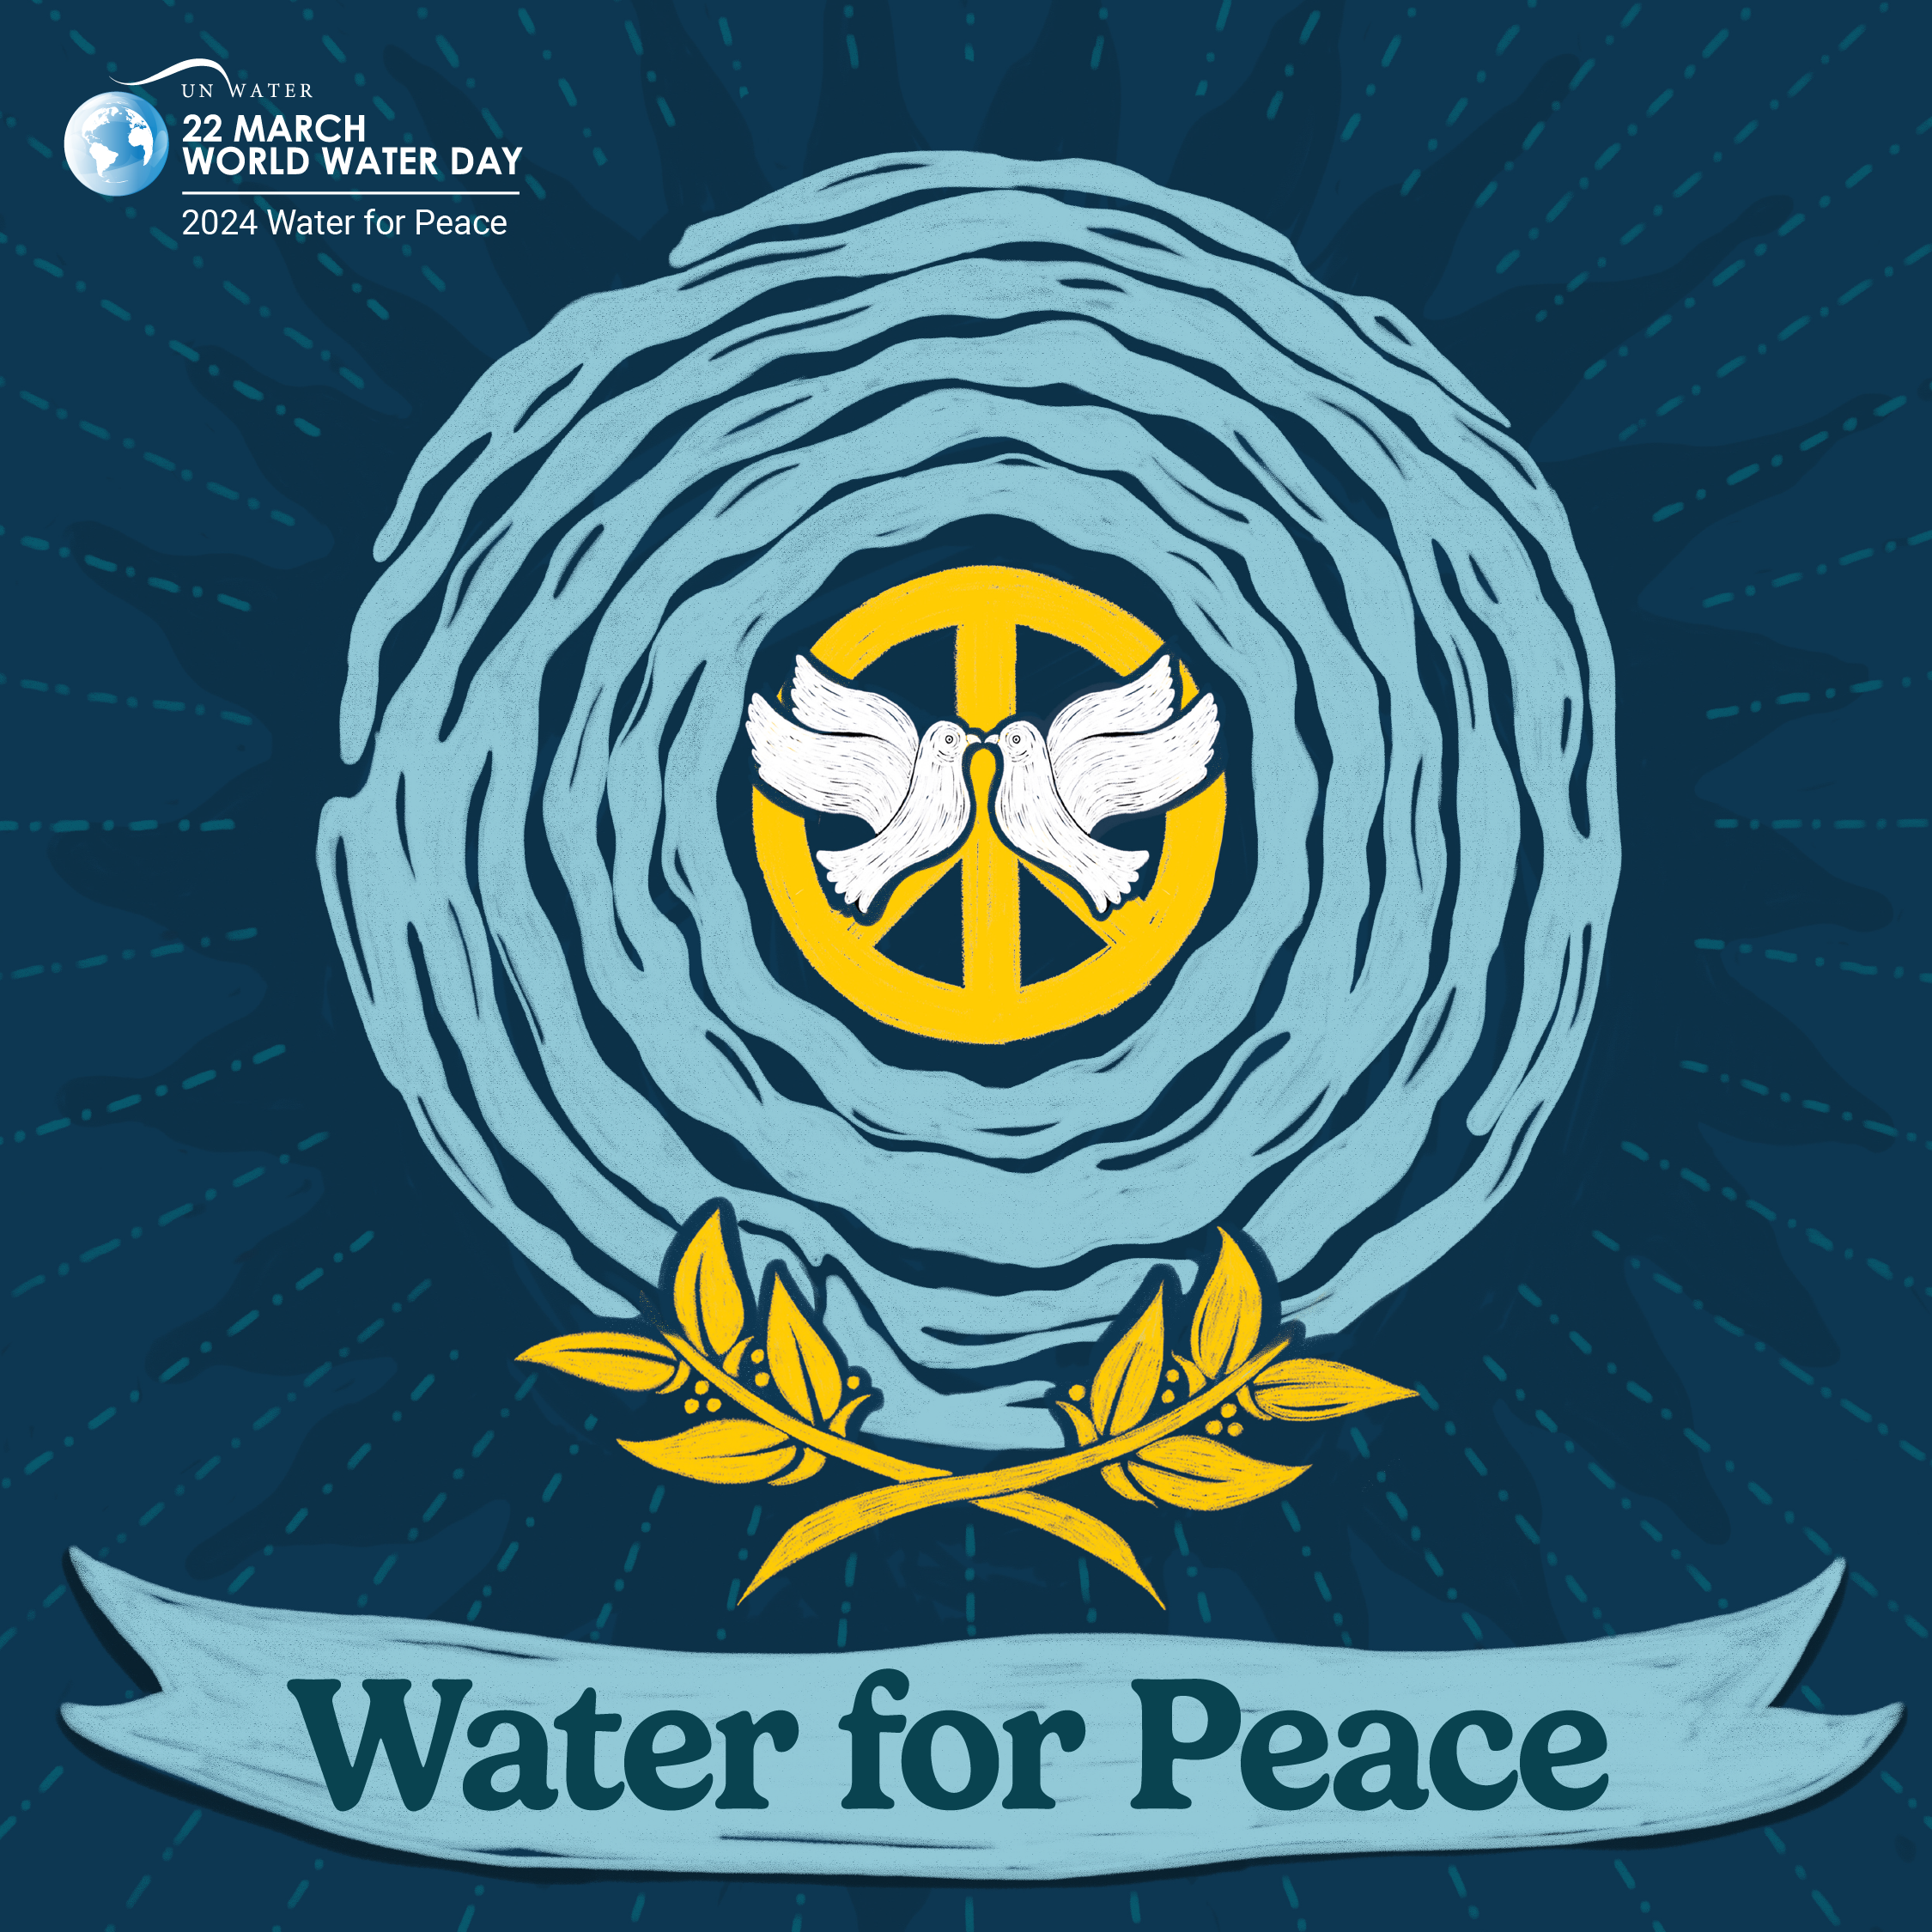 UN Water graphic - in the top left is the text 22 March World Water Day 2024 Water for Peace. The image is a dark blue background with a light blue banner-like shape at the bottom with text 'Water for Peace'. In the centre is a mirrored-image of light blue water-like shapes connecting in a circle, with a yellow 'peace' symbol in the middle and two white doves in the centre. At the bottom of the circle is two yellow overlapping leafy stems.